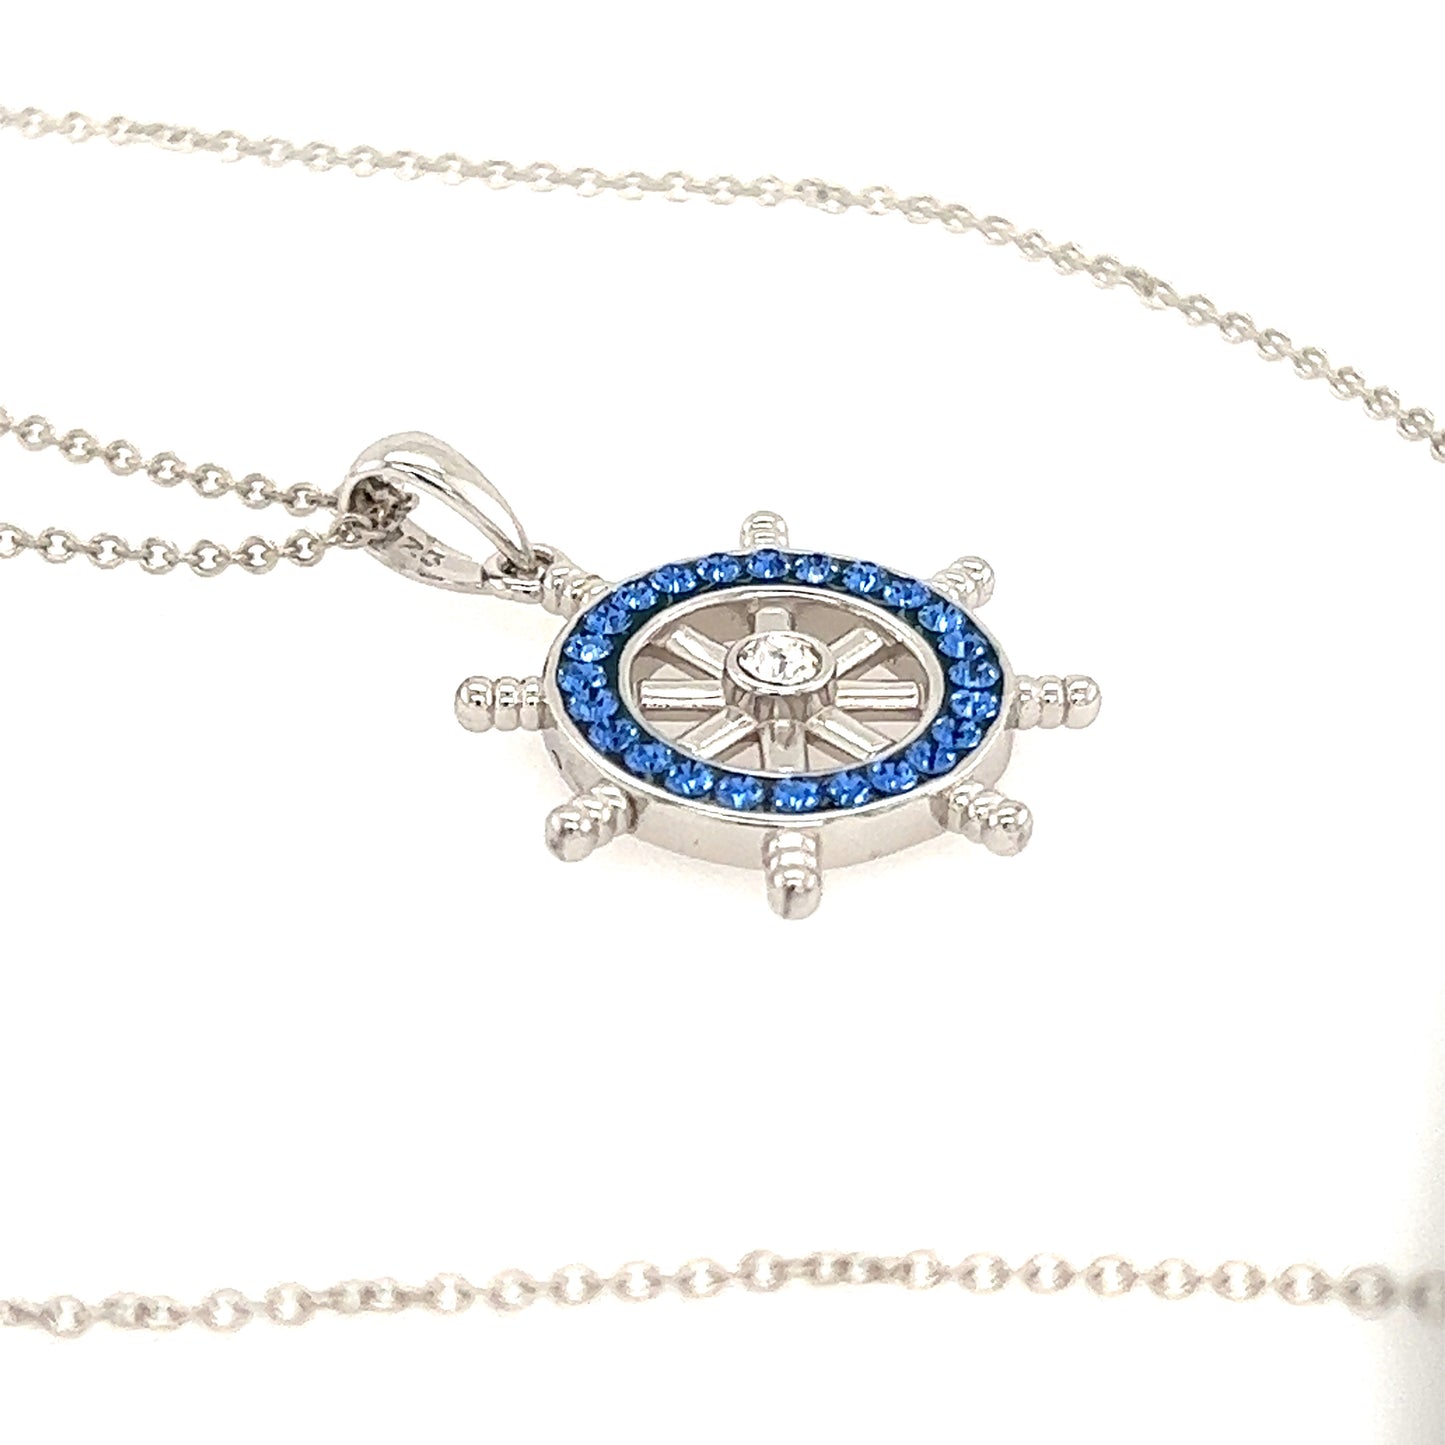 Ship's Wheel Necklace with Blue Crystals in Sterling Silver Side View